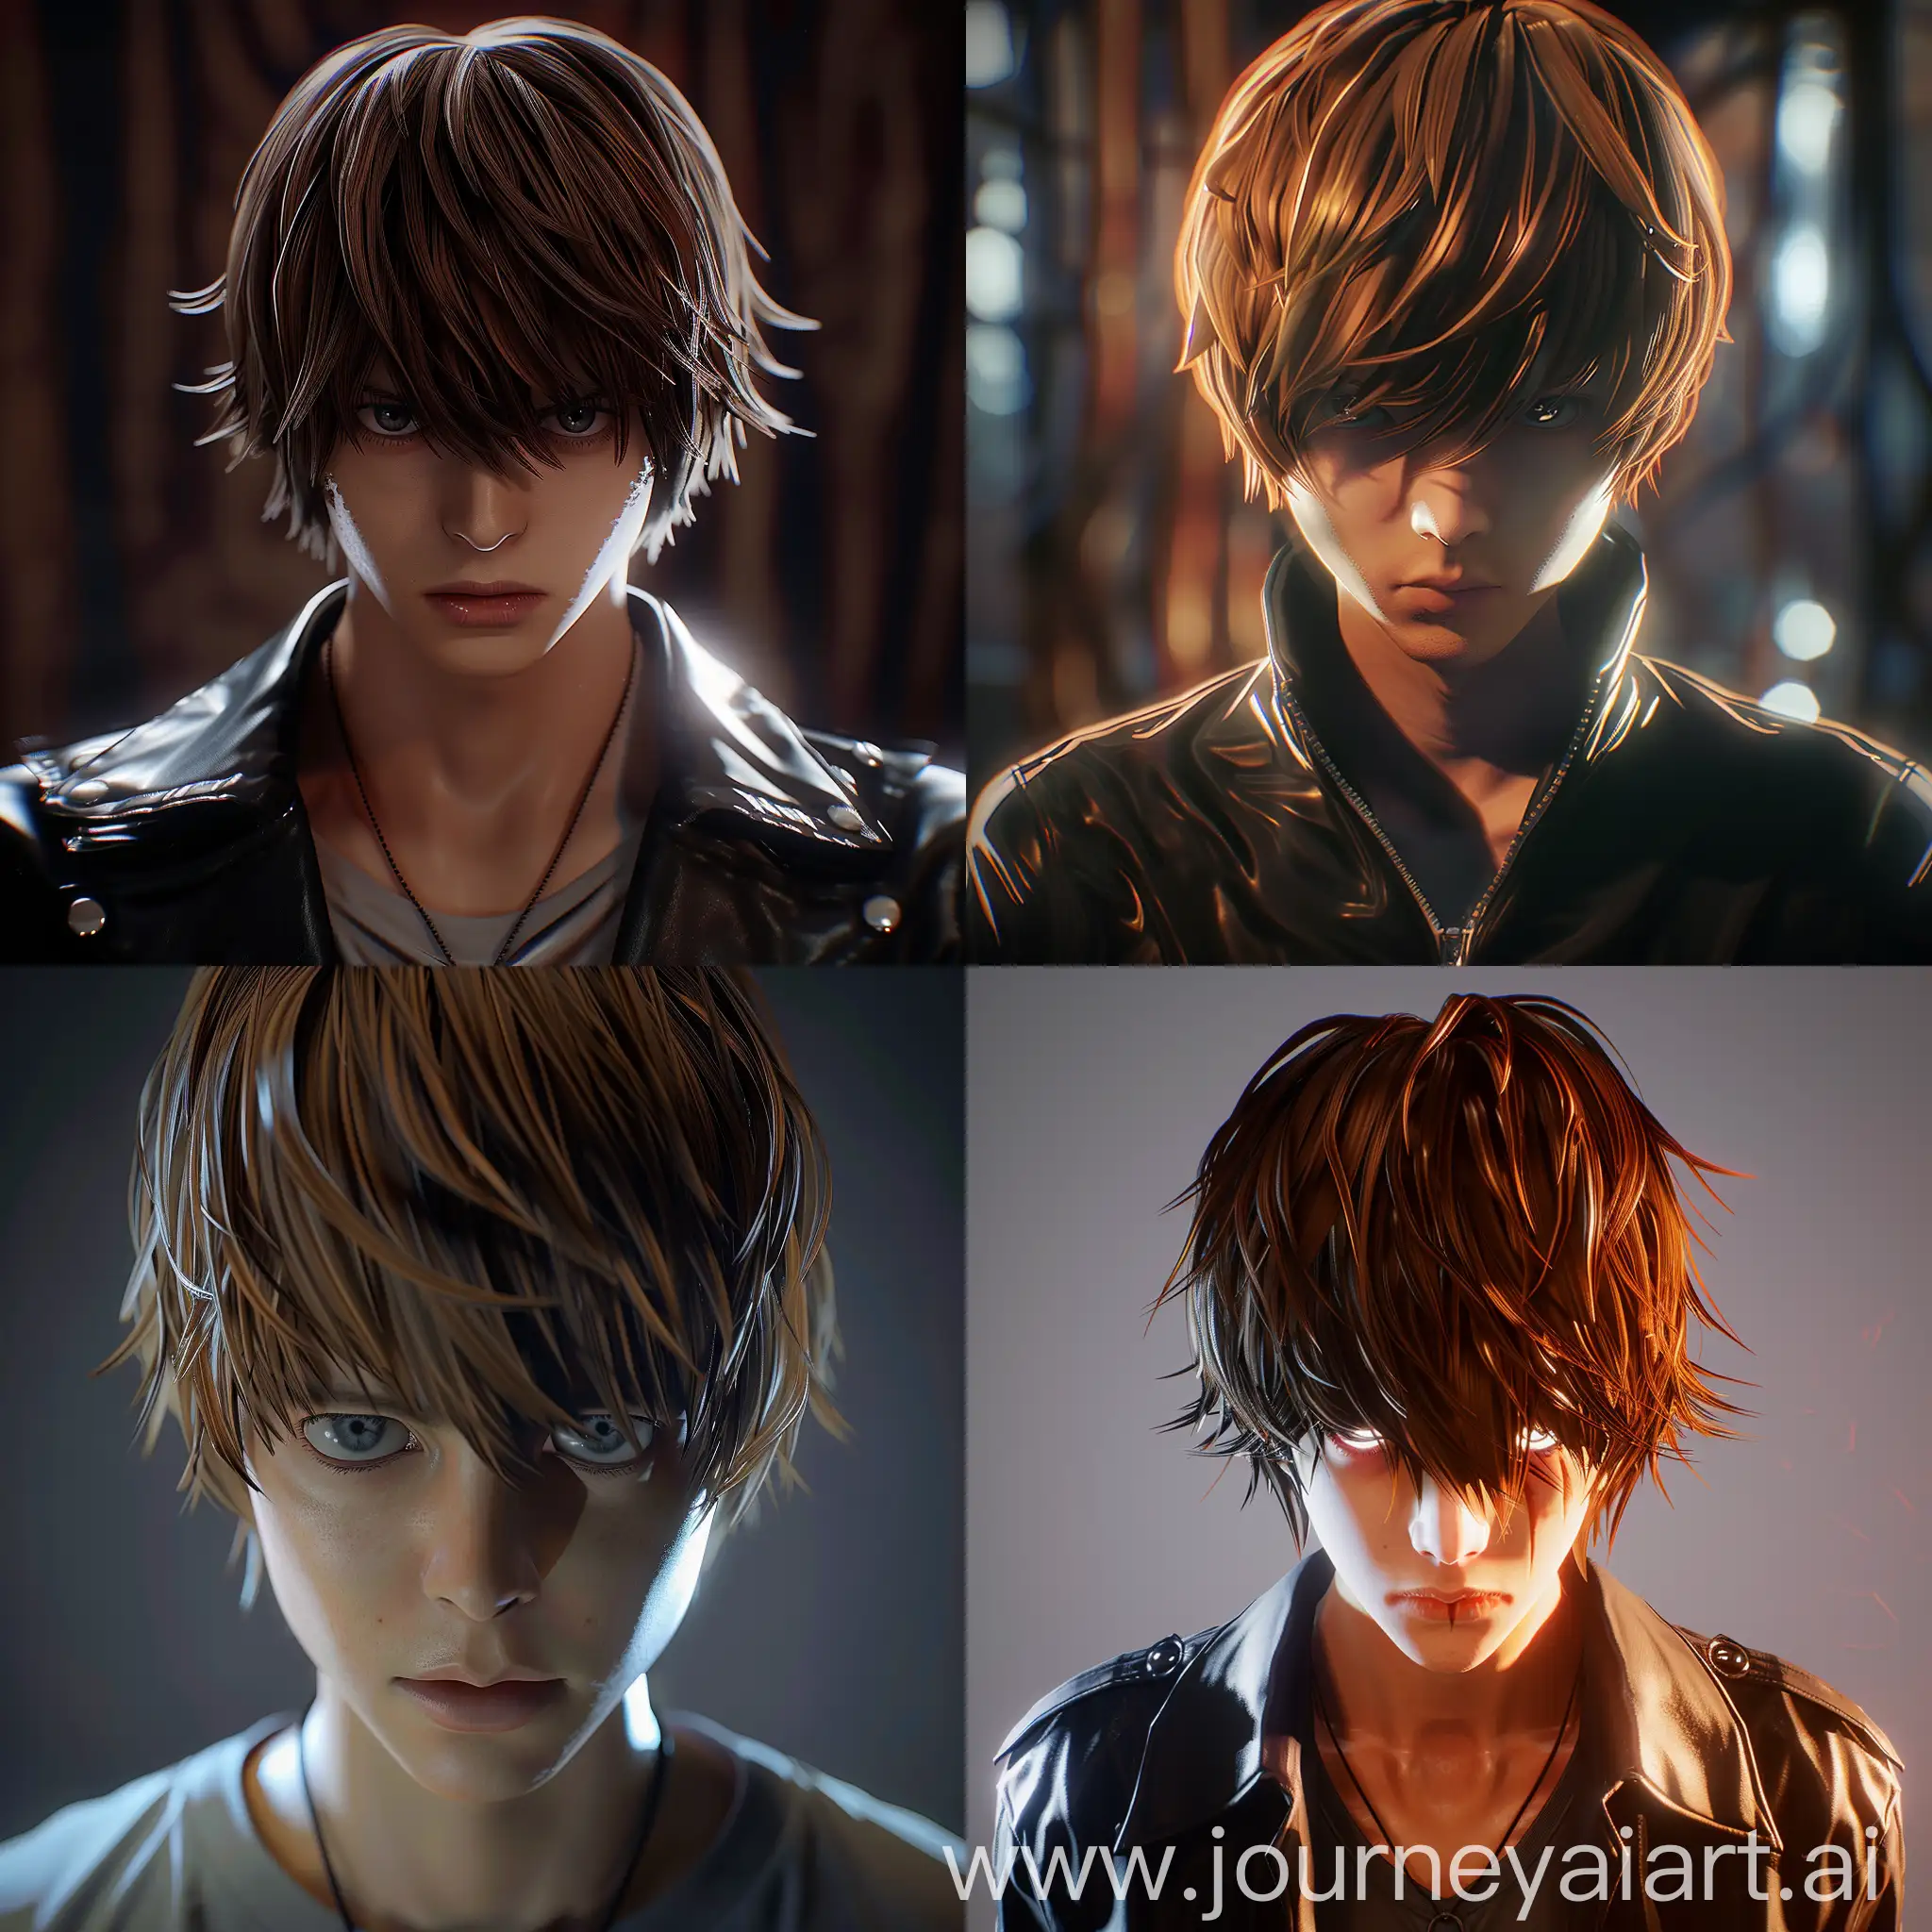 Light-Yagami-from-Death-Note-Anime-in-4K-Ultra-HD-Unreal-Engine-6-Rendering